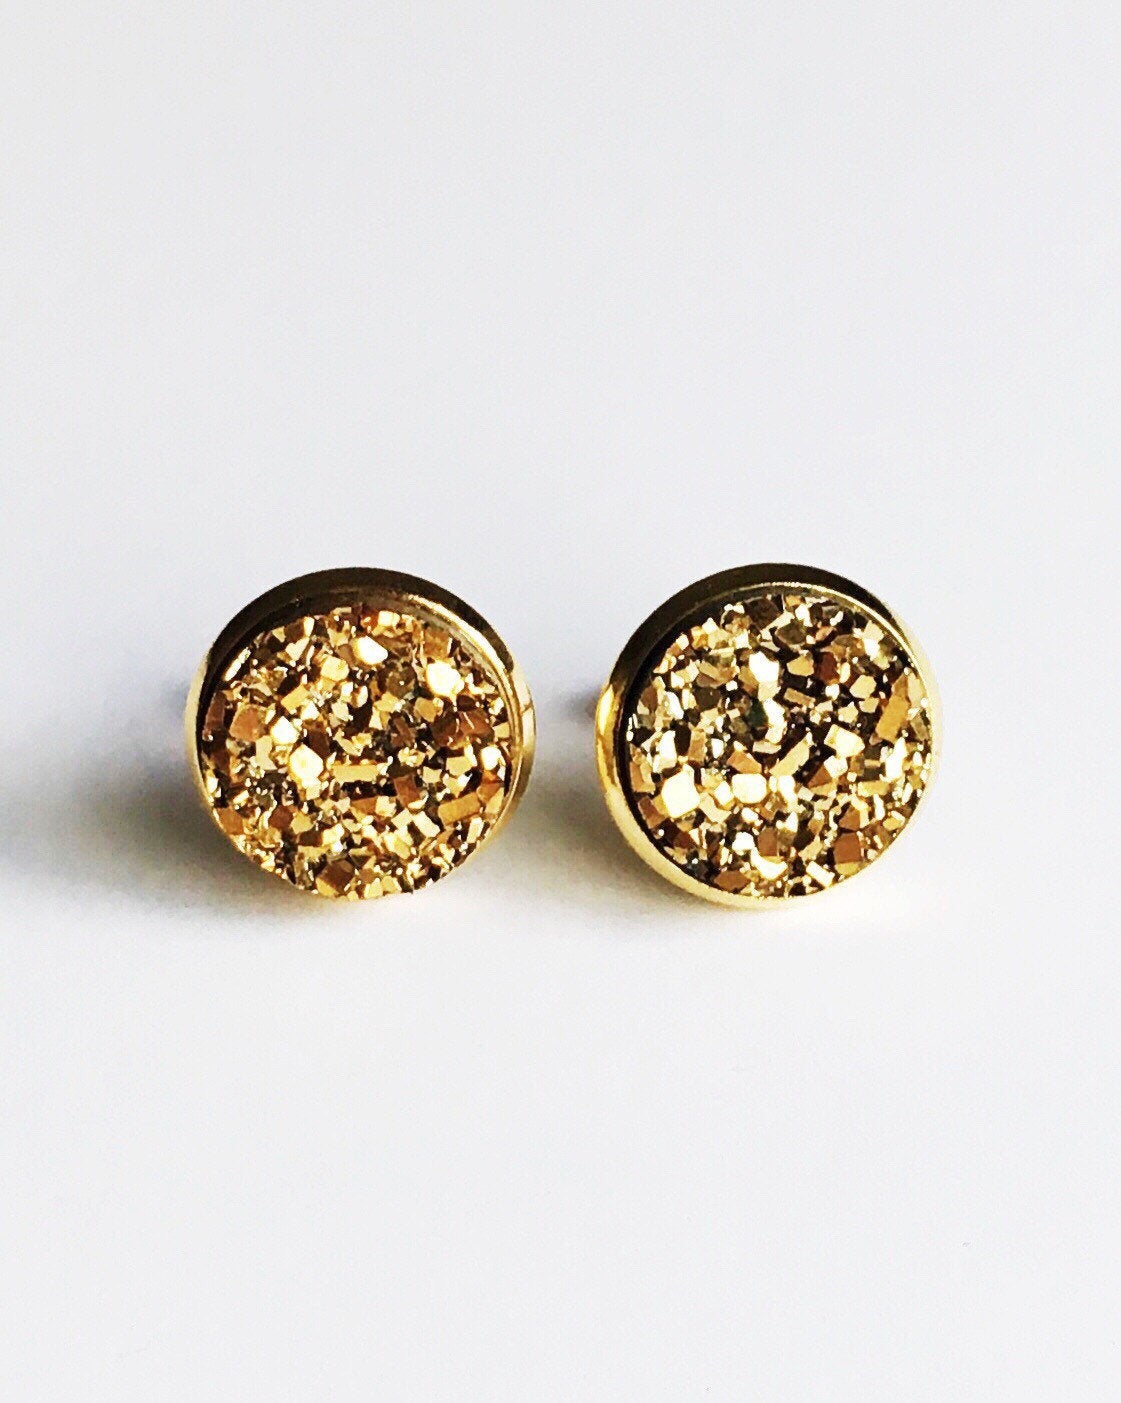 Gold resin druzy stone stud earrings is set in a yellow gold color setting. 